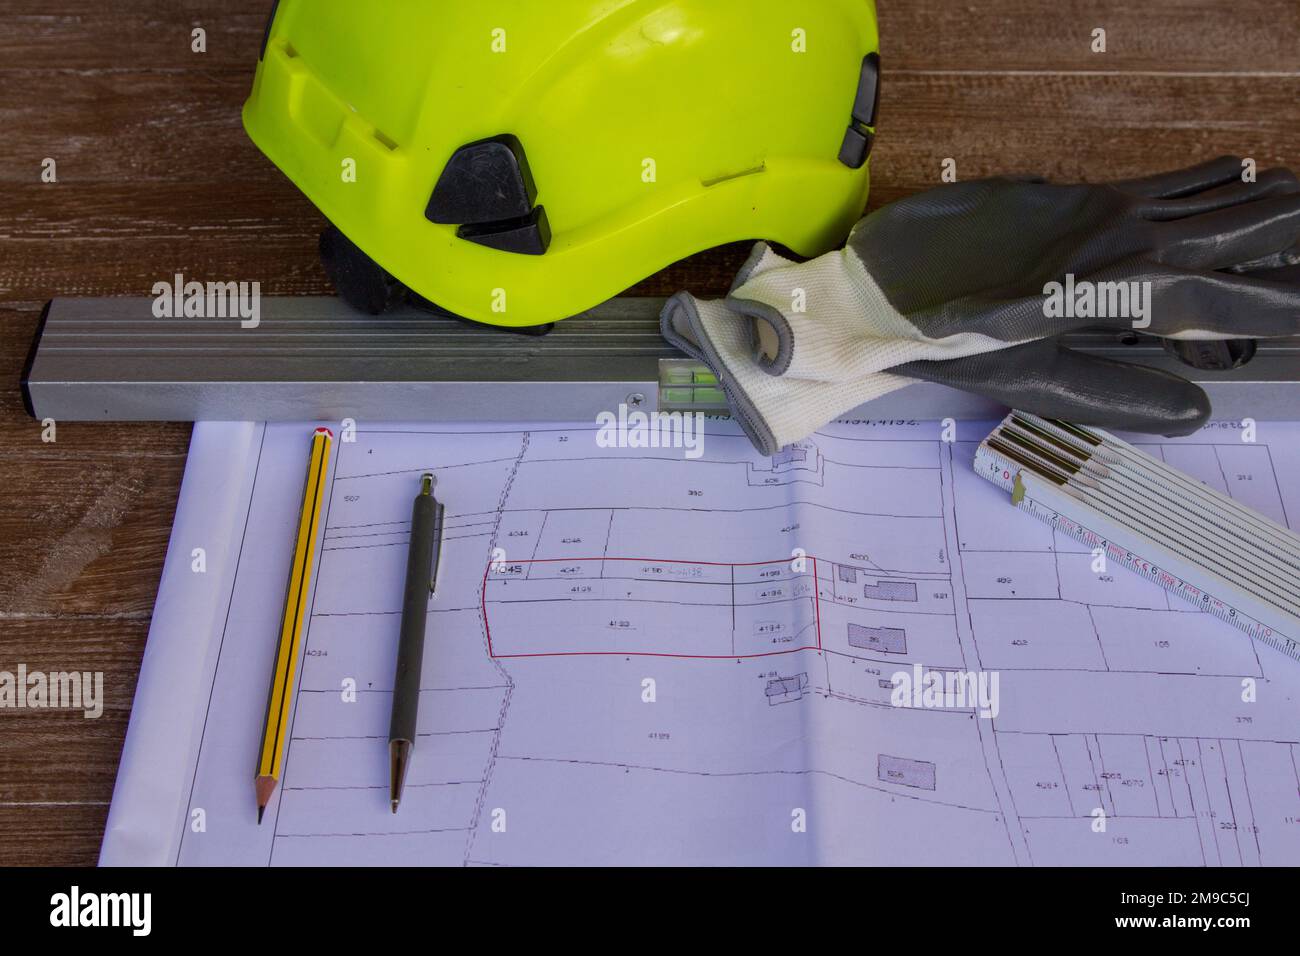 Image of a work table where there are drawings of land plans and building projects, on elect and work gloves. Stock Photo